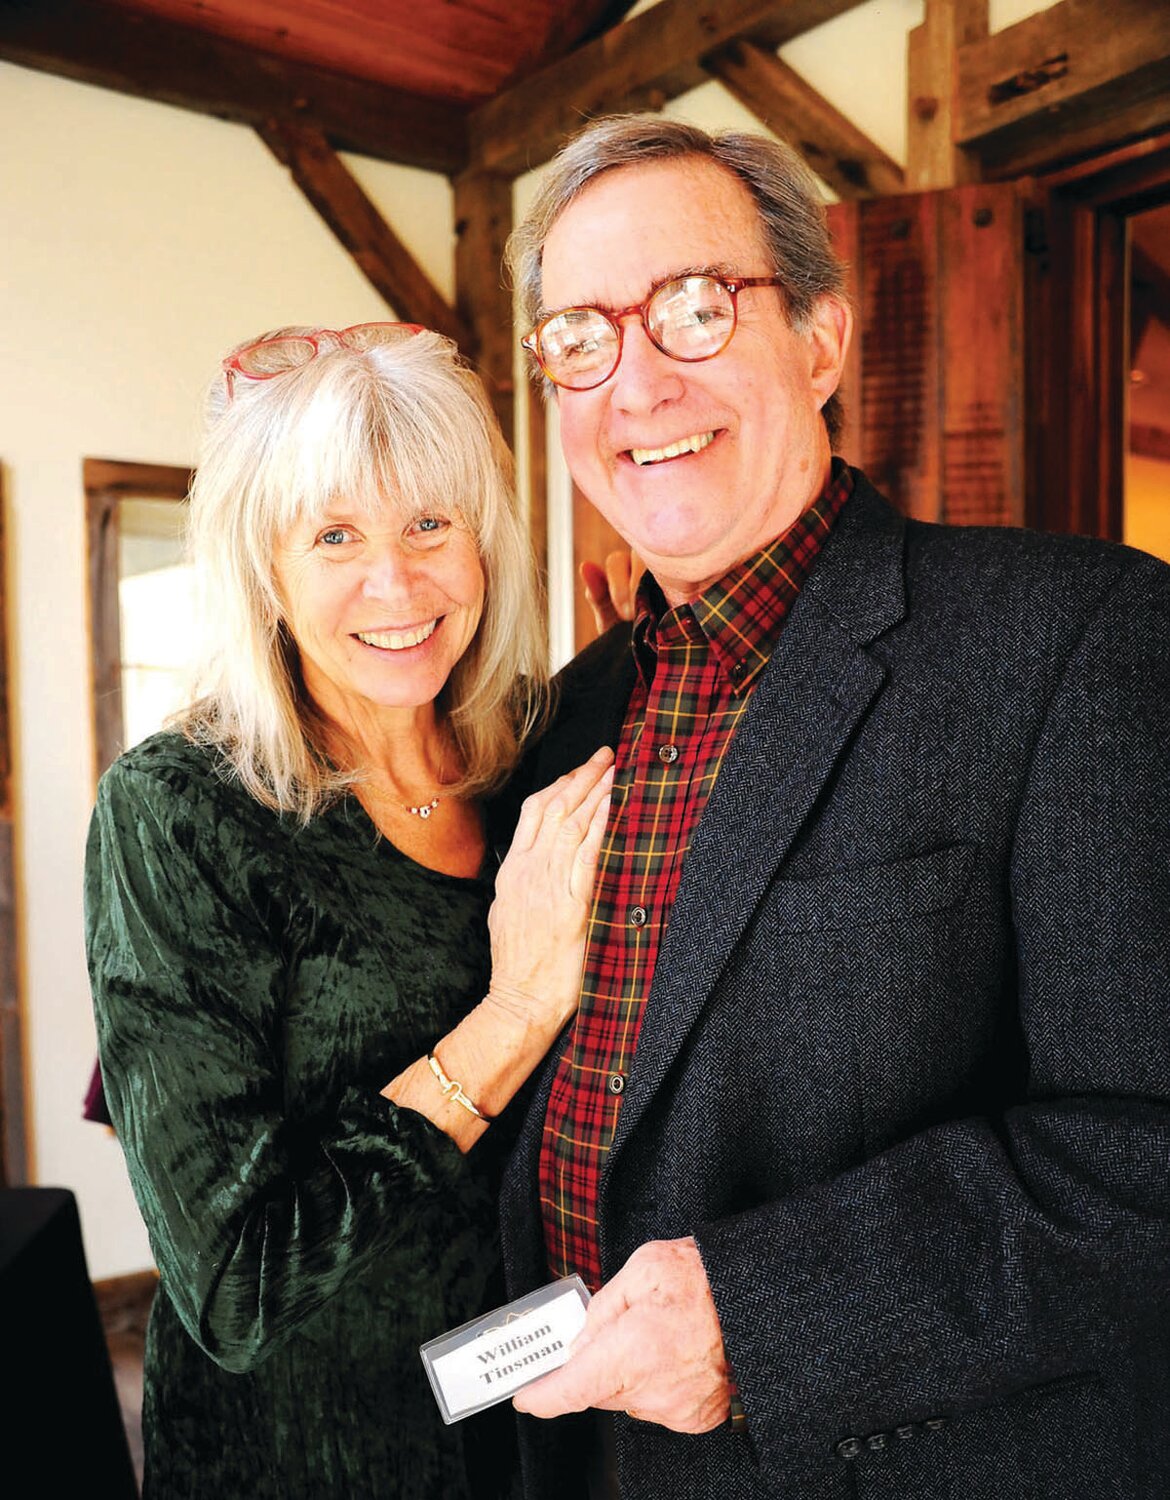 A fixture in the riverside community in Solebury, Bill Tinsman, shown here with wife Melody Hunt, died on Aug. 6.